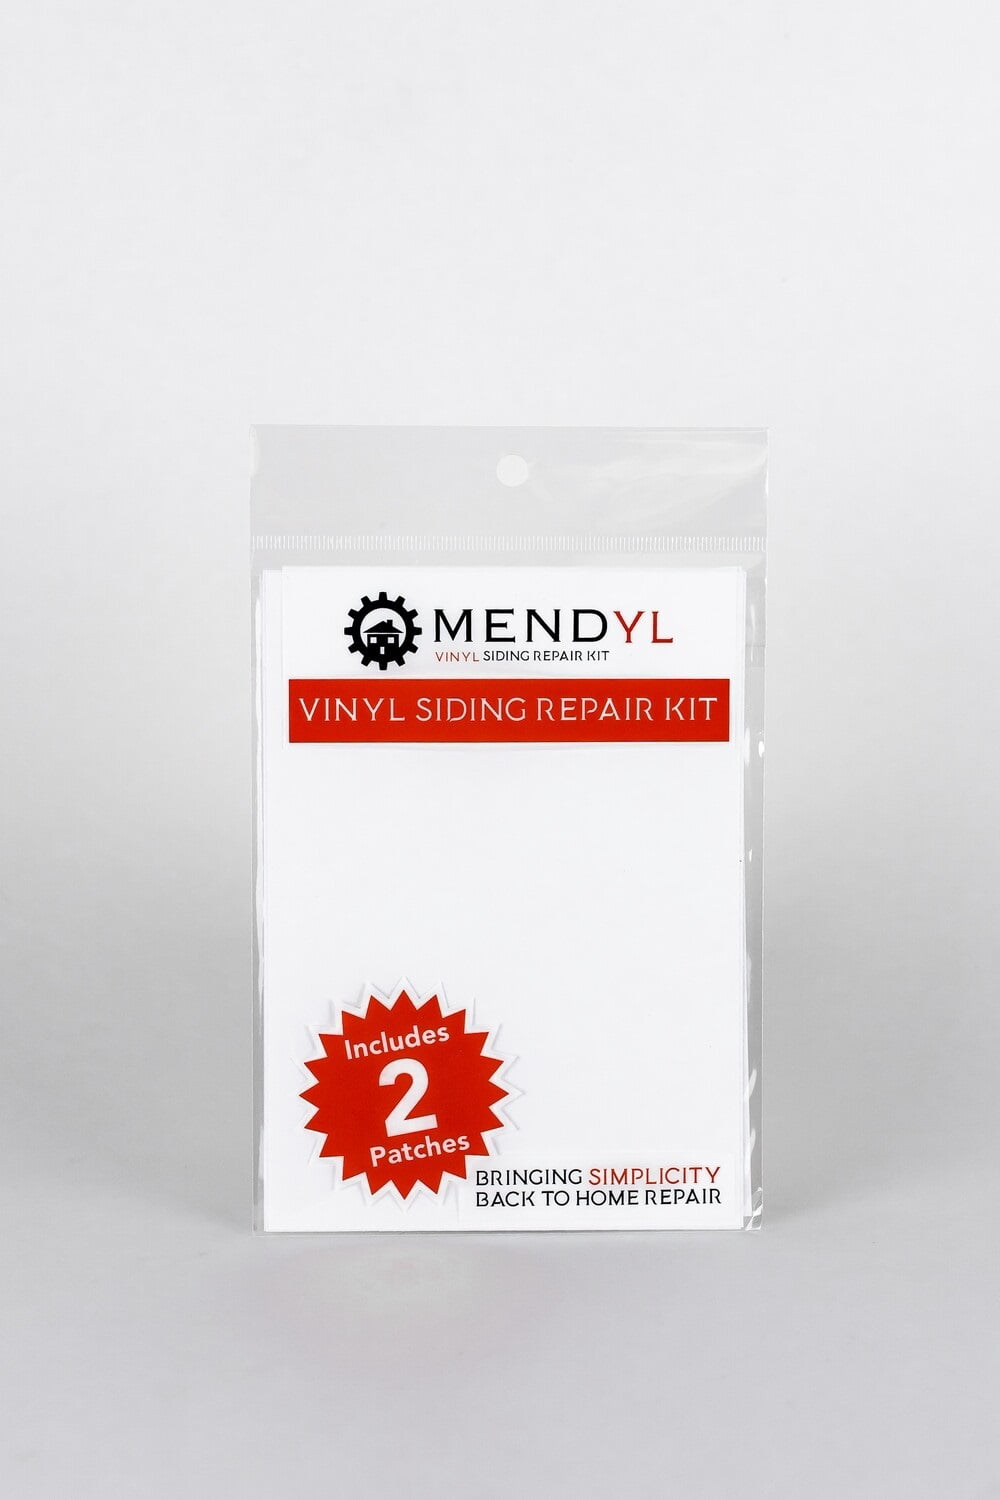 Mendyl Contractor 10 Pack of Vinyl and Stucco Siding Repair Kit, Cover Any  Cracks, Holes, or Blemishes on Vinyl and Stucco Siding - 1